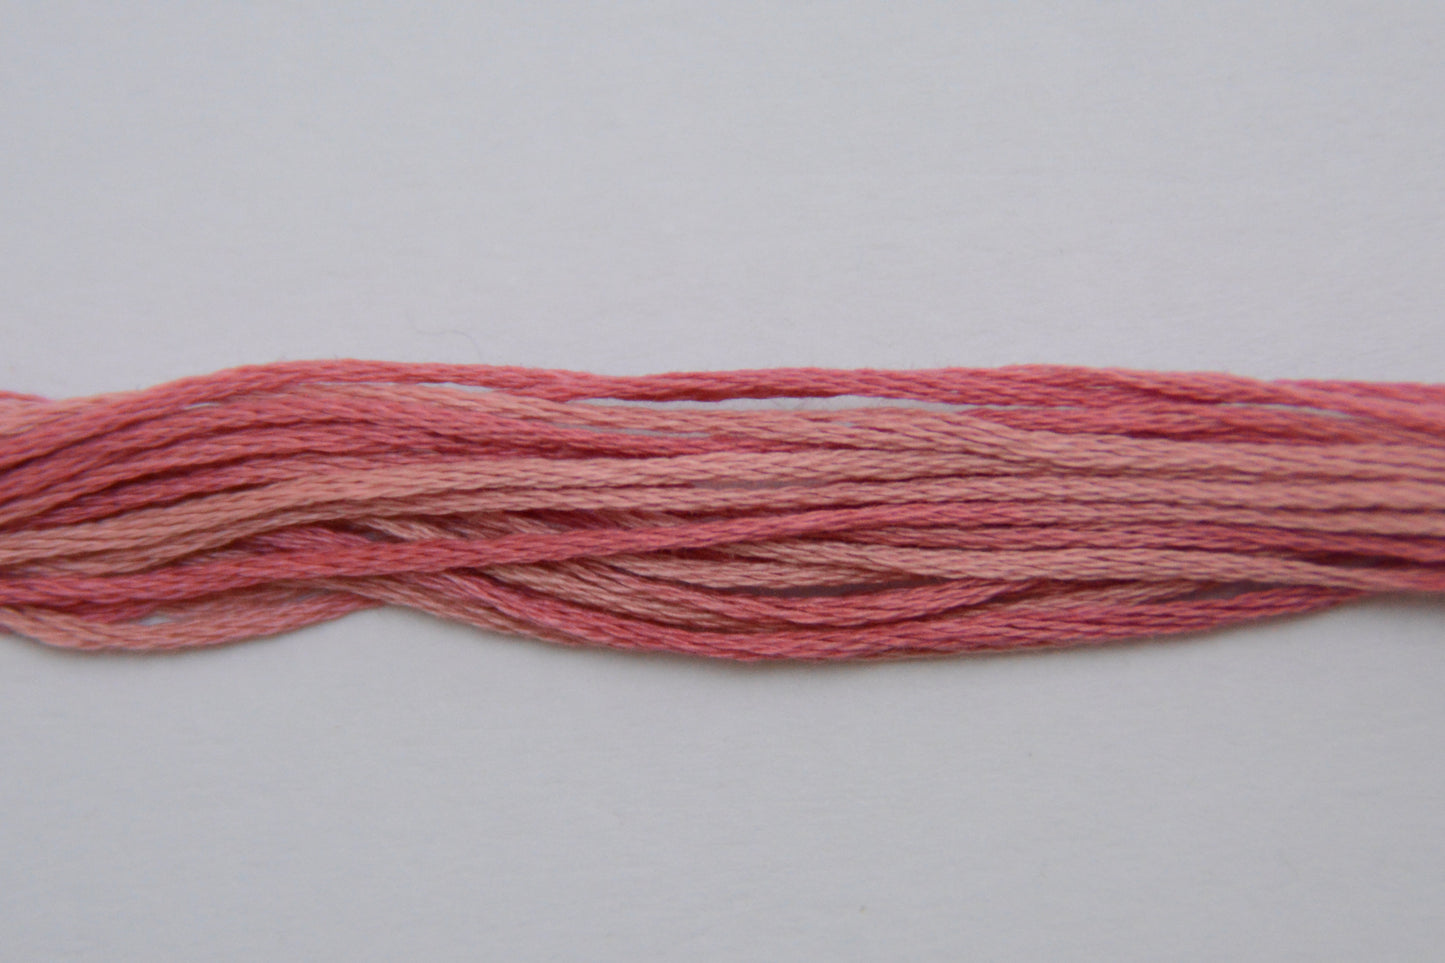 Madison Rose 2284 Weeks Dye Works 6-Strand Hand-Dyed Embroidery Floss